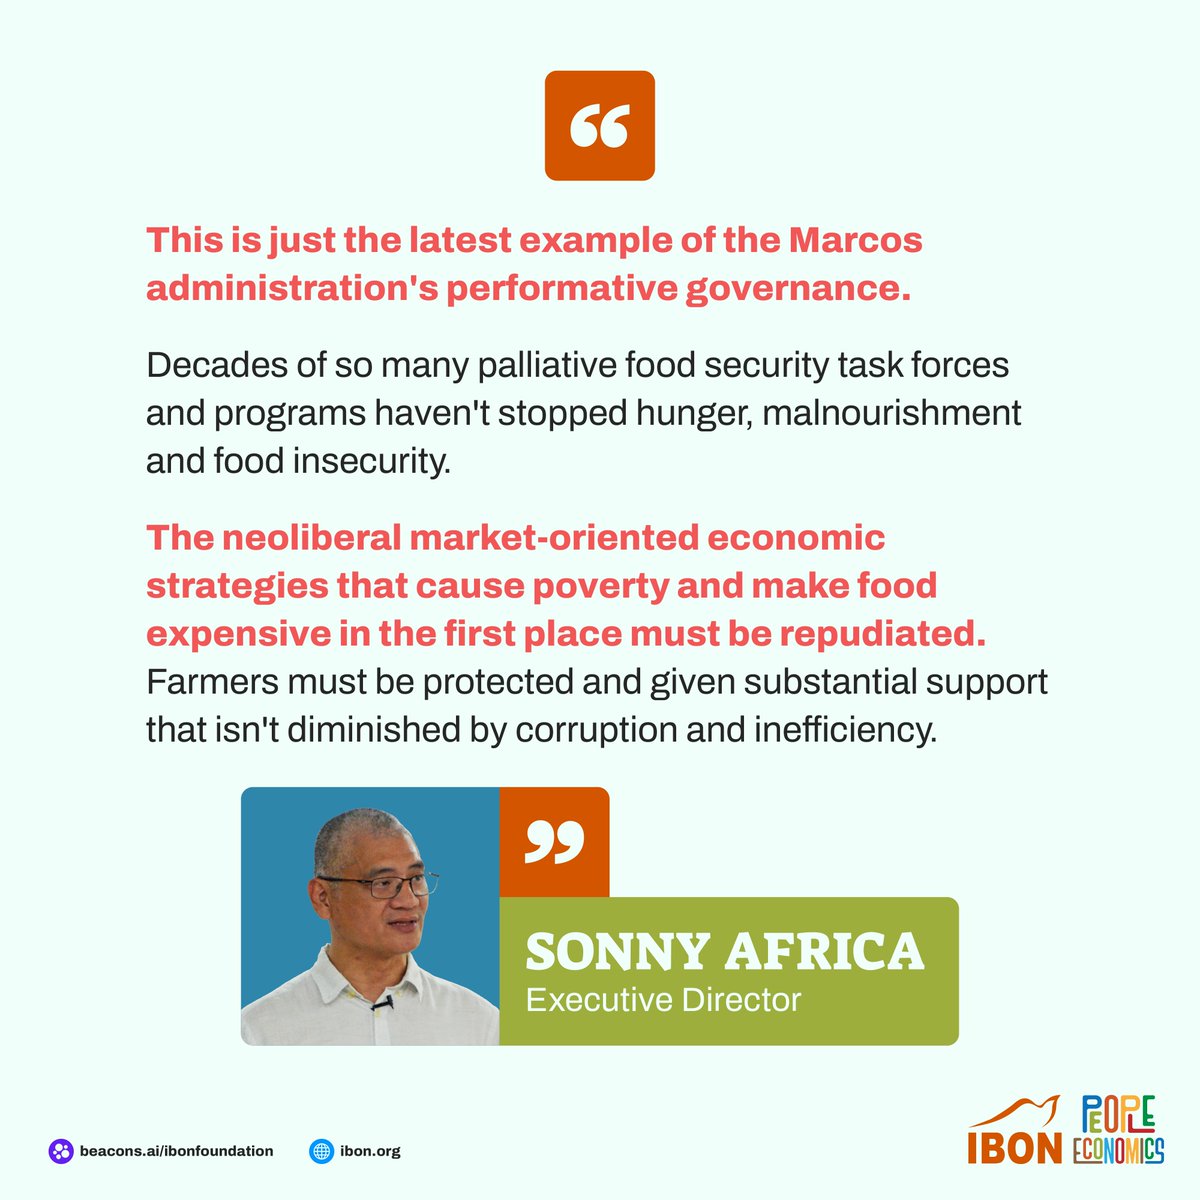 'Decades of so many palliative food security programs haven't stopped food insecurity. Neoliberal strategies that make food expensive in the first place must be repudiated.' IBON Executive Director on the Enhanced Partnership Against Hunger and Poverty (EPAHP) #PeopleEconomics